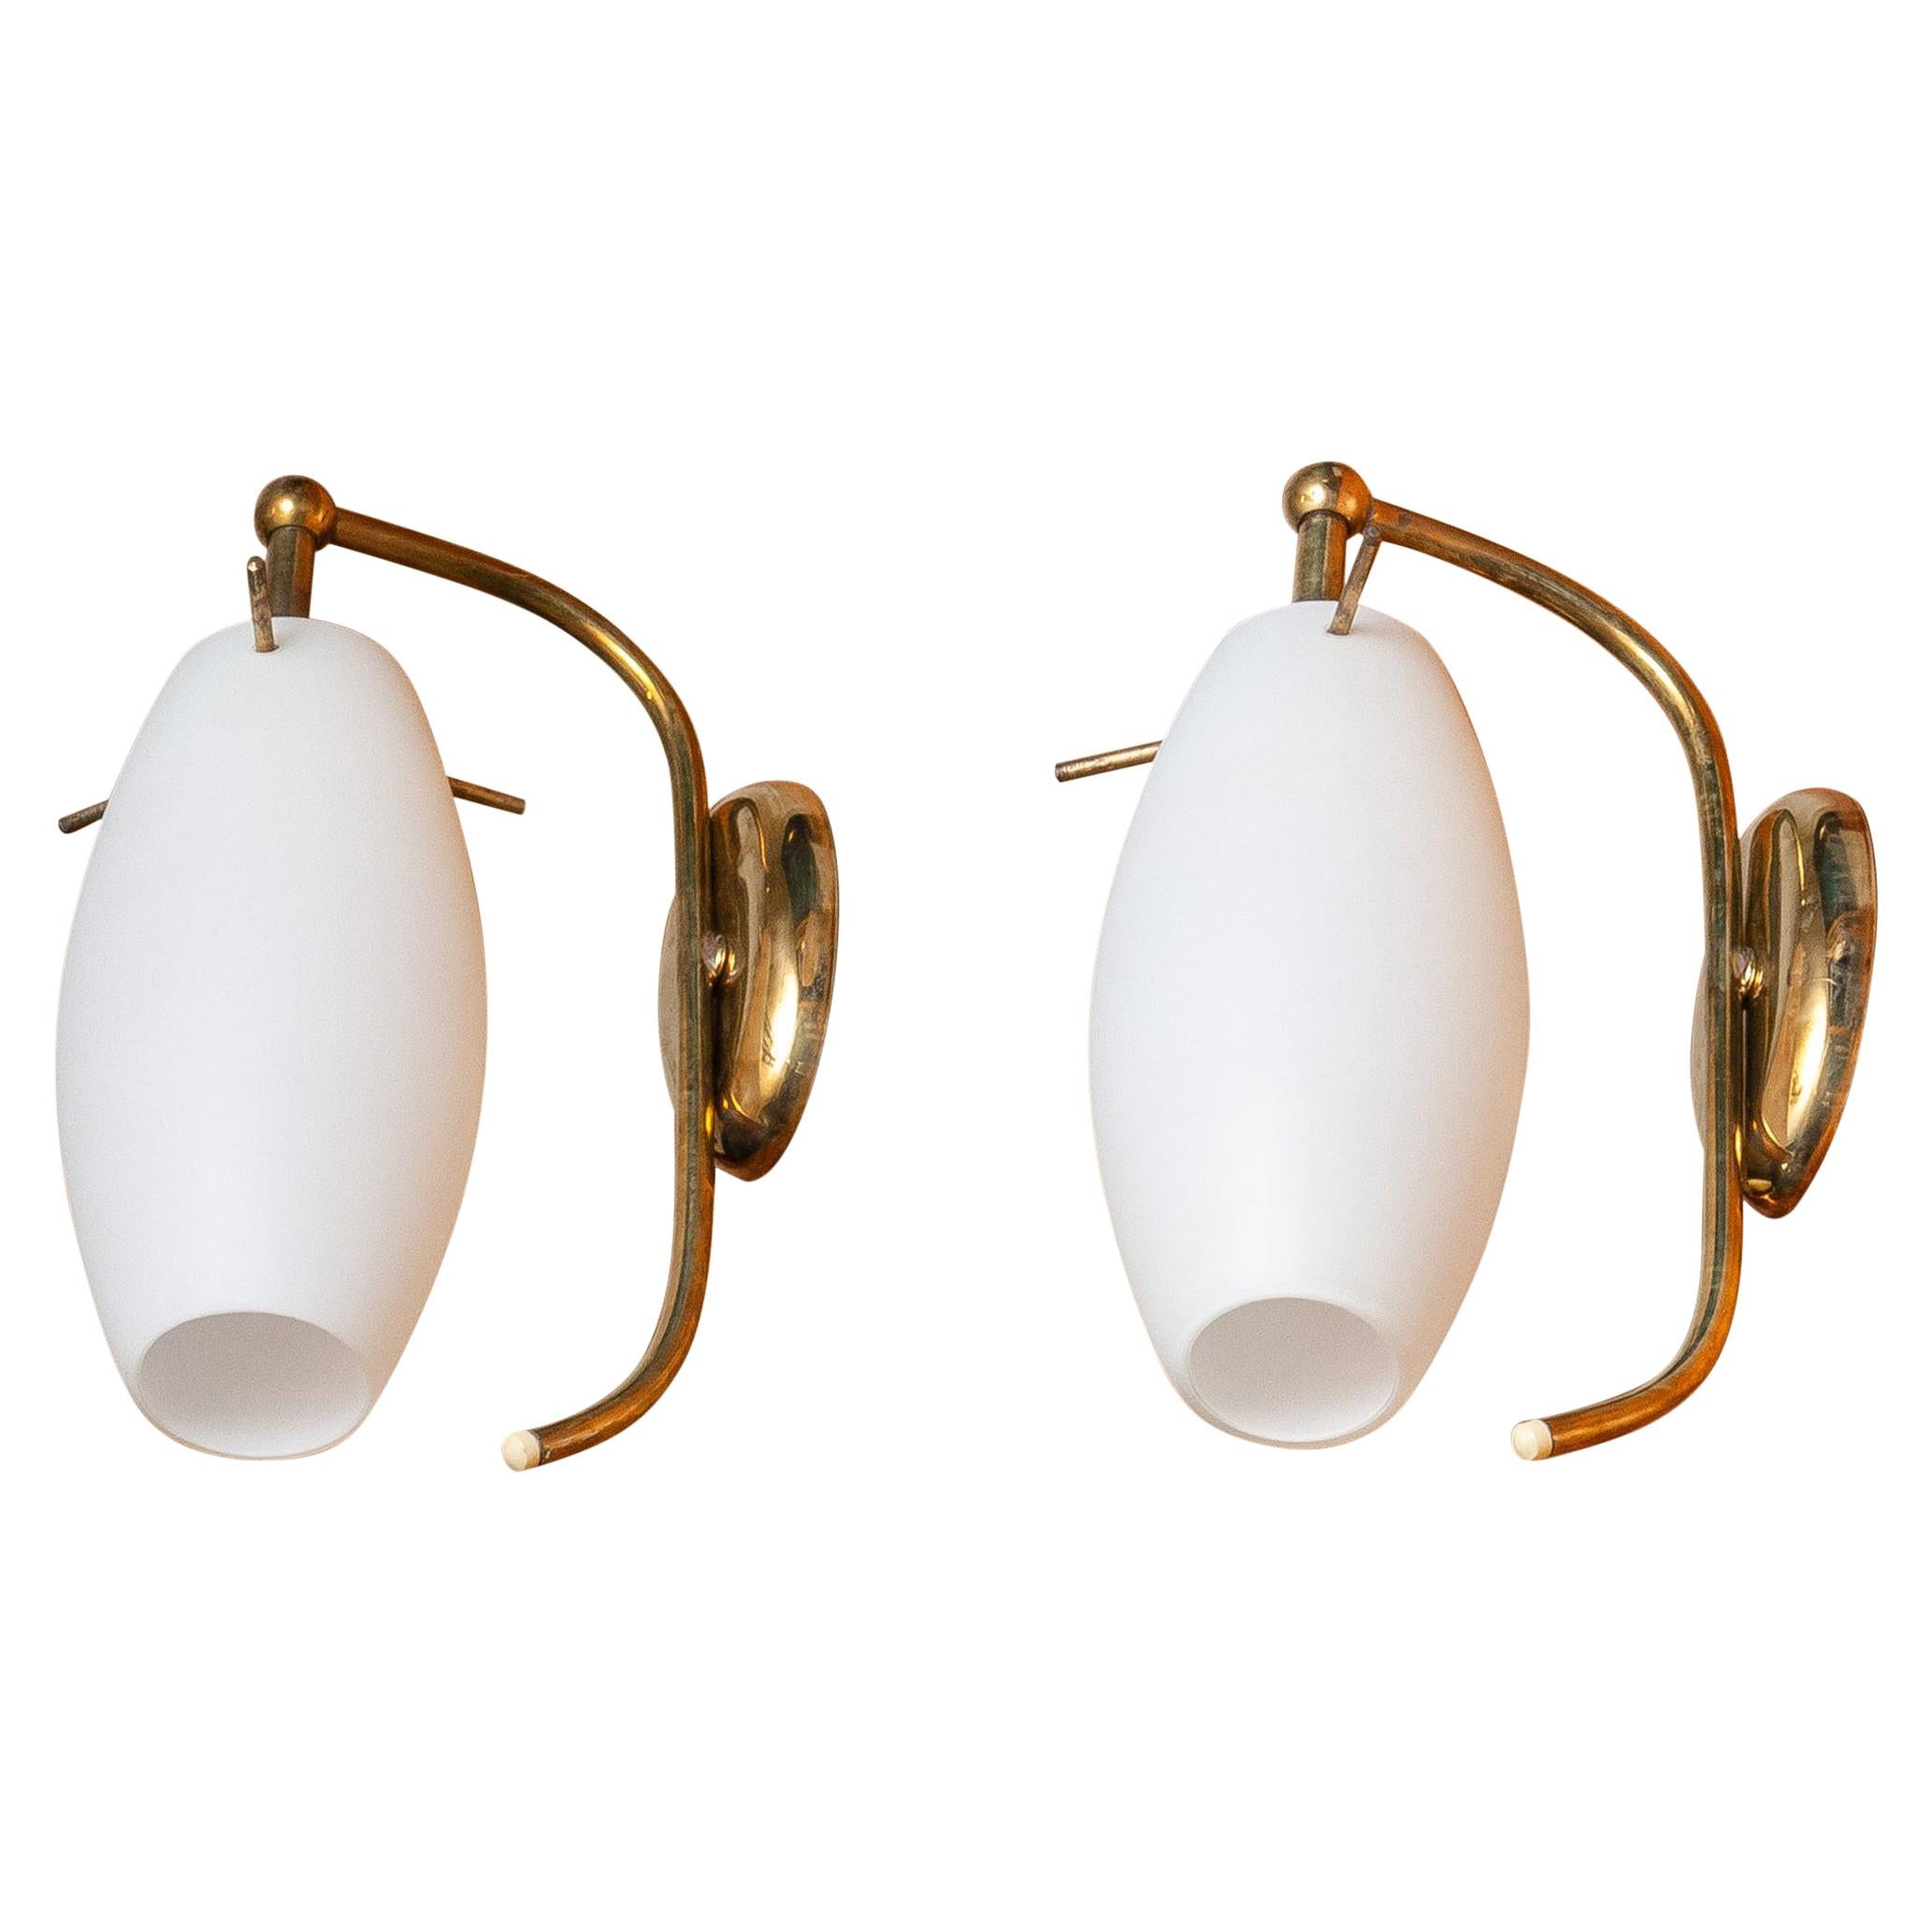 1950s, Pair of Brass Stilnovo Wall Lights with Opaline Shades / Vases, Italy